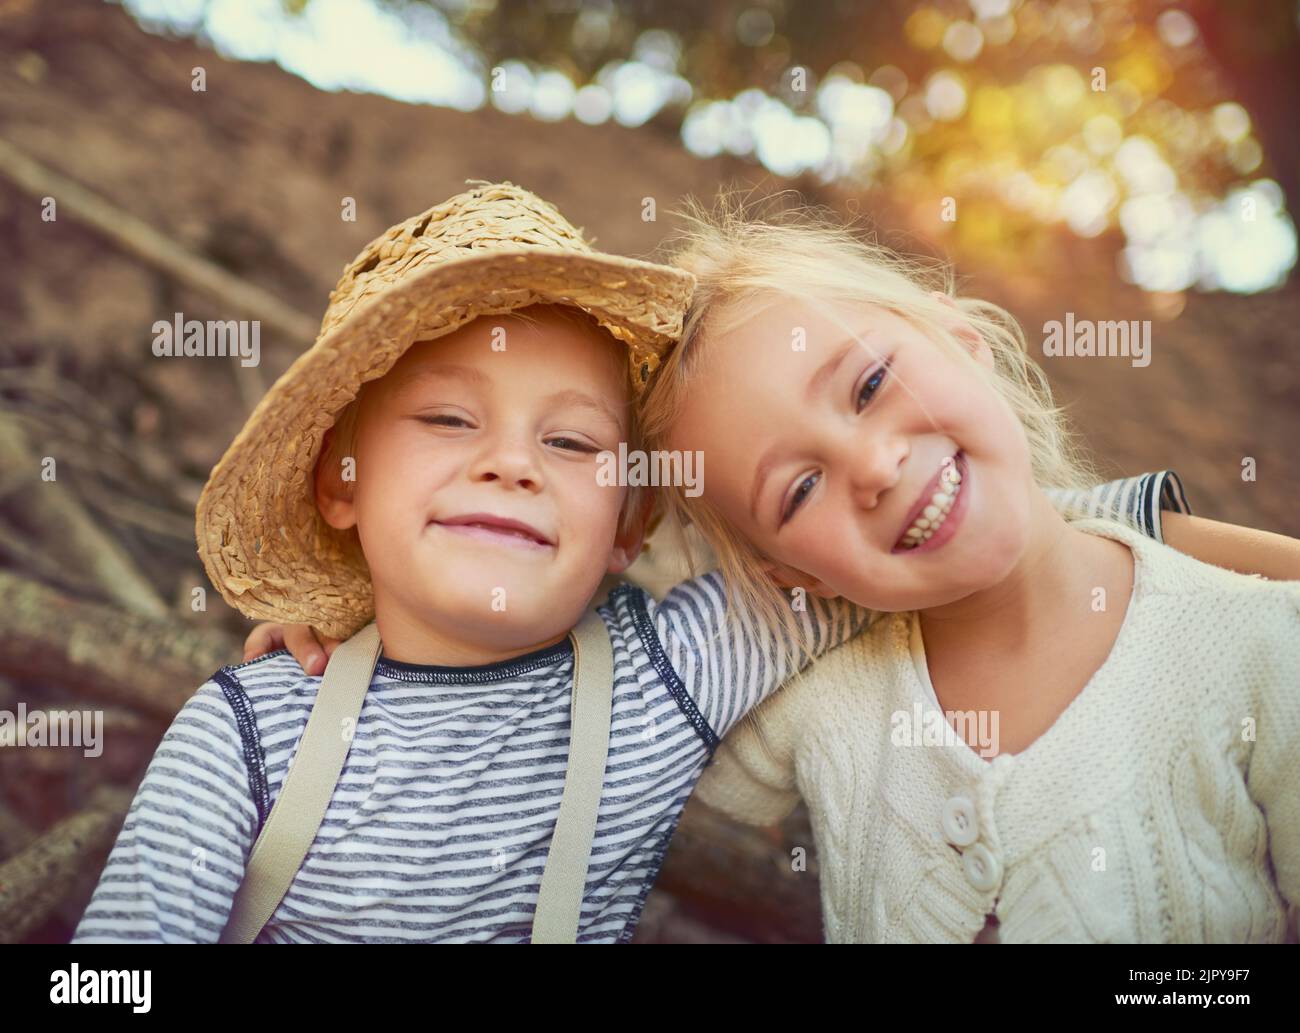 Having fun is our rule number one. Portrait of two little children playing together outdoors. Stock Photo